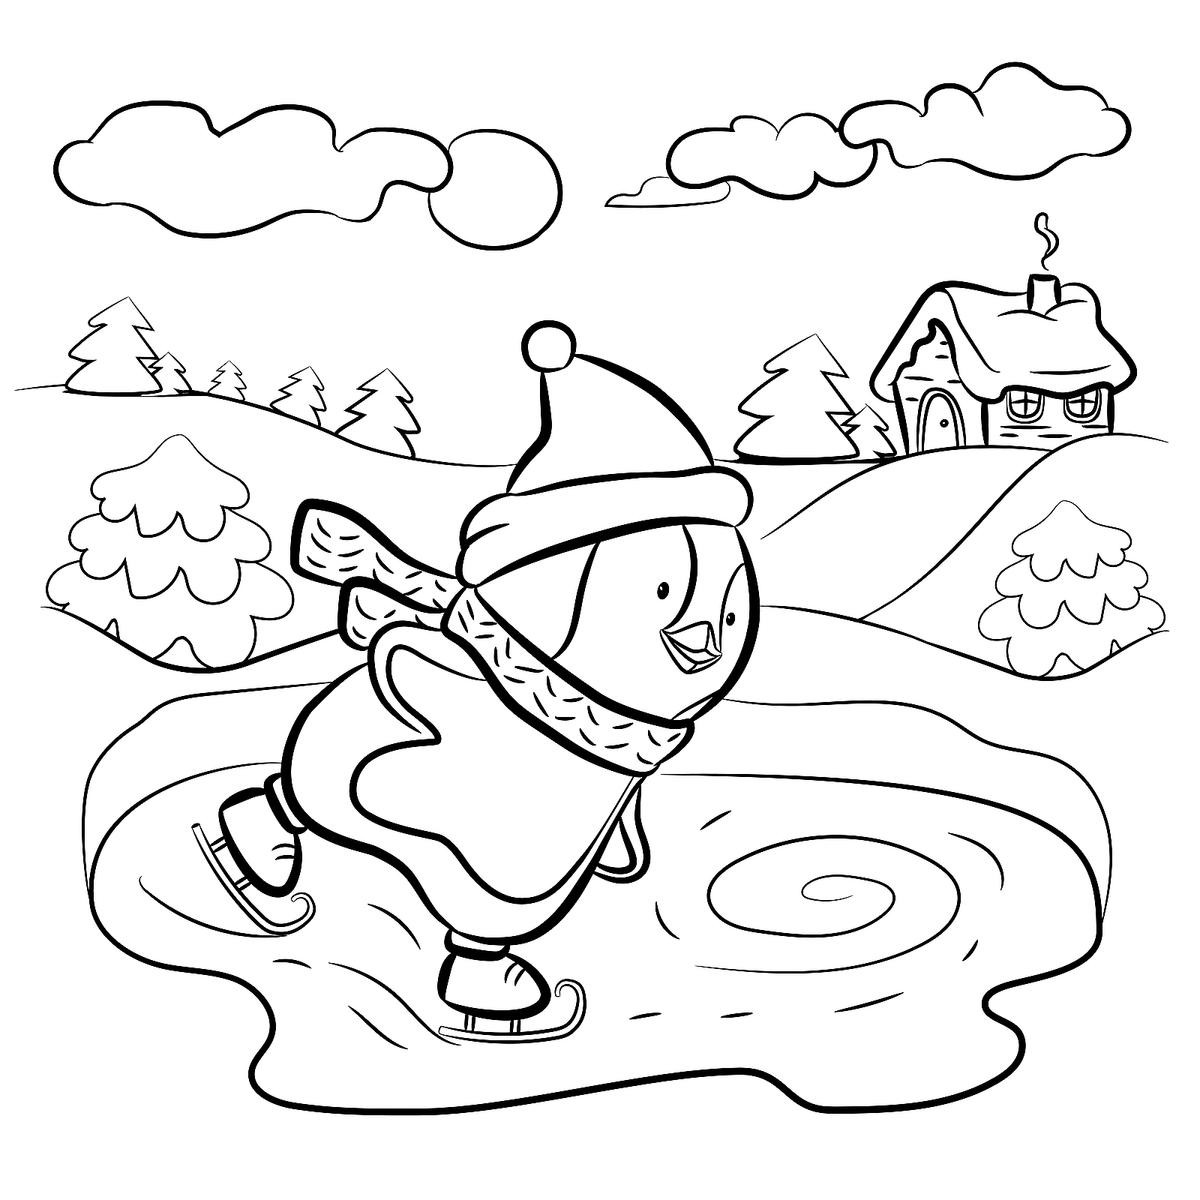 Free Printable Winter Coloring Pages
 Winter Puzzle & Coloring Pages Printable Winter Themed